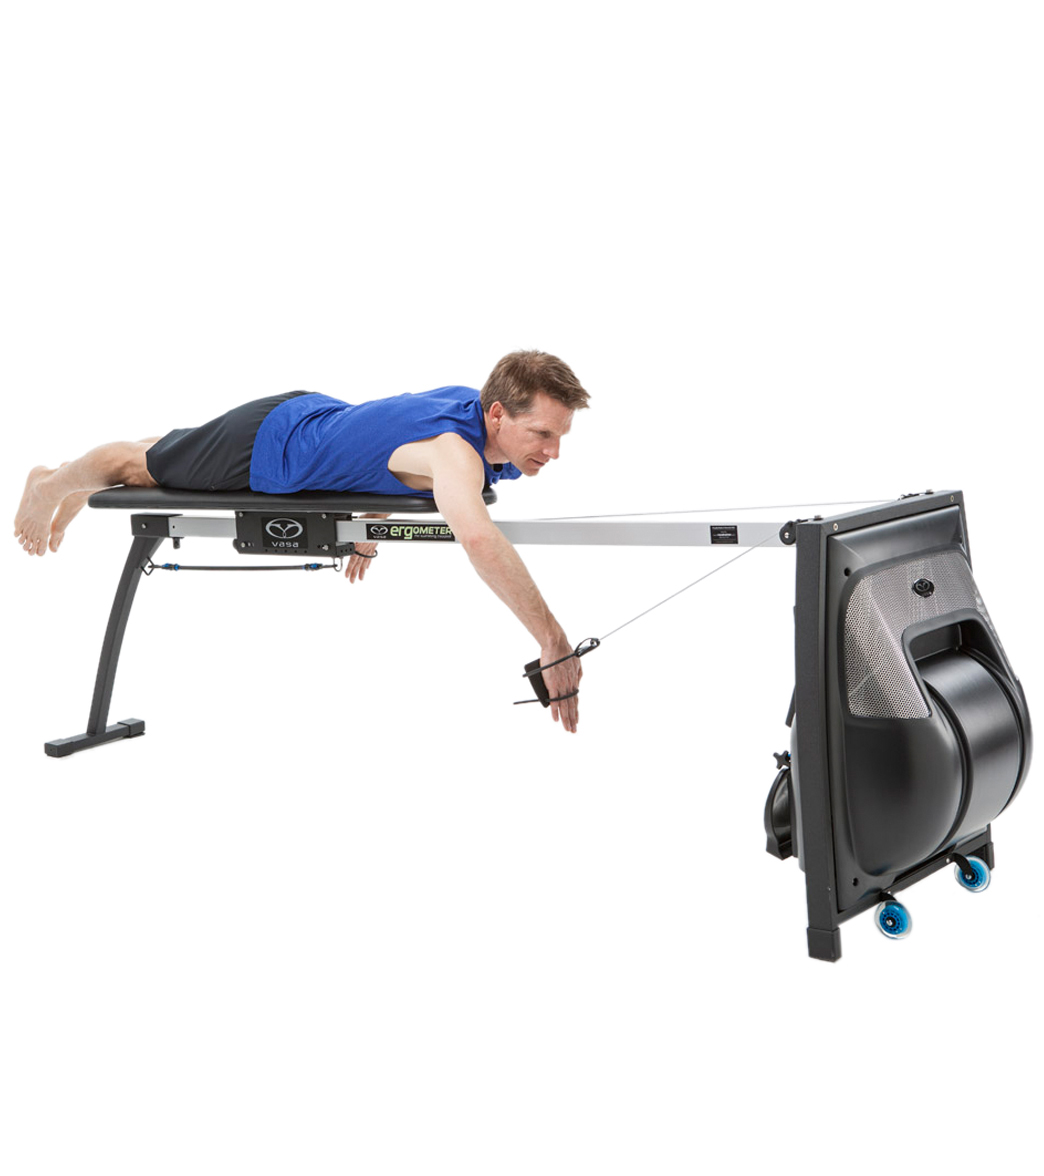 55 Simple Rowing workouts for swimmers for ABS